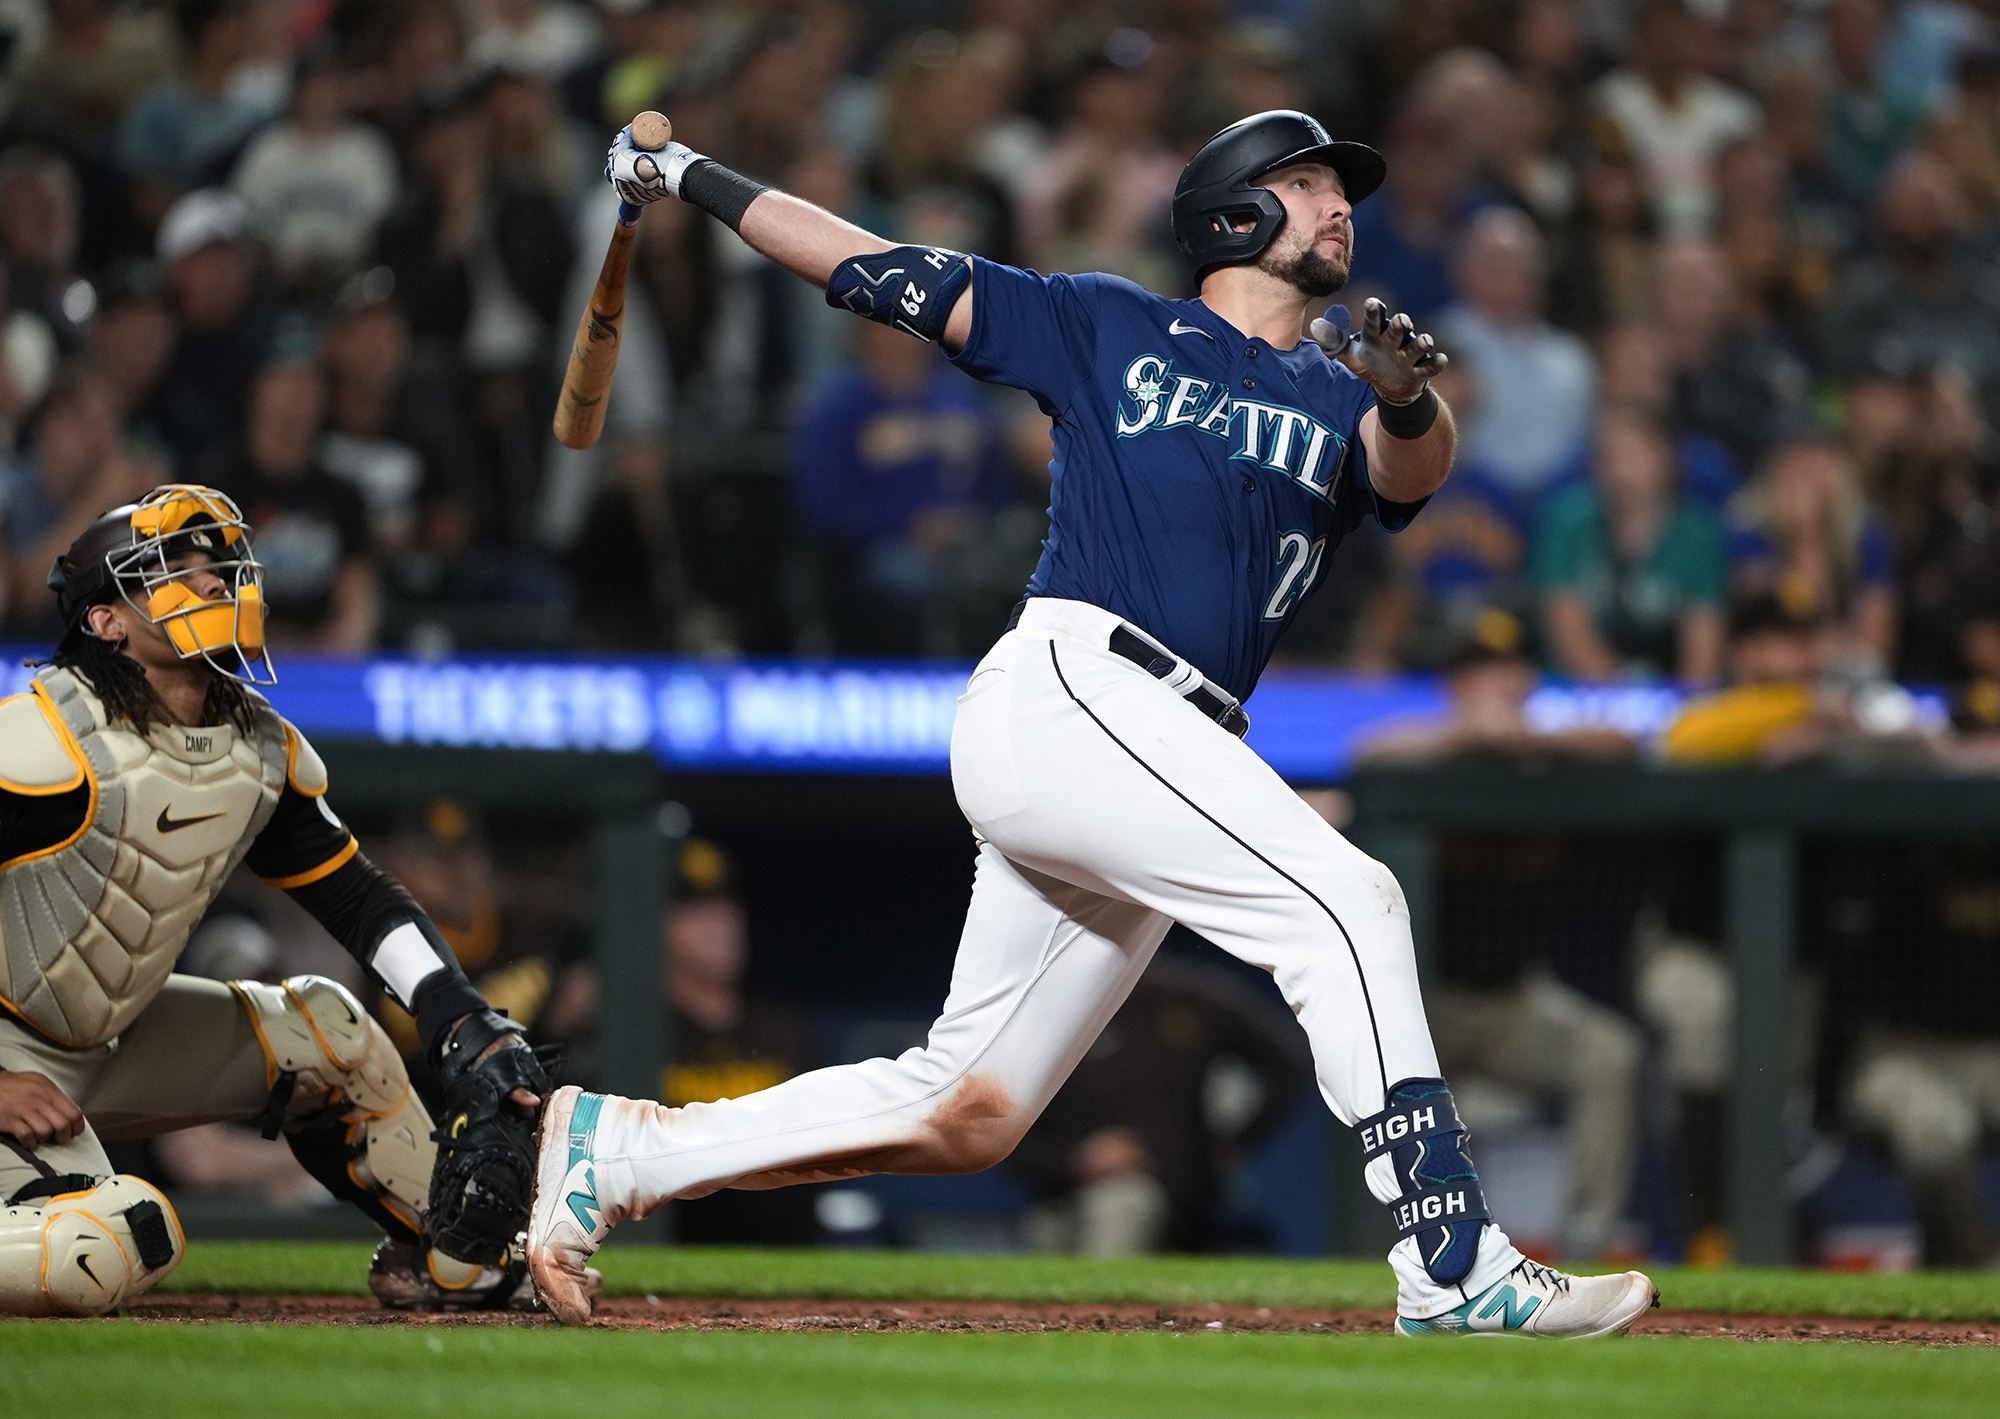 Seattle Mariners' Cal Raleigh watches his two-run home run next to San Diego Padres catcher Luis Campusano during the eighth inning of a baseball game Wednesday, Aug. 9, 2023, in Seattle.